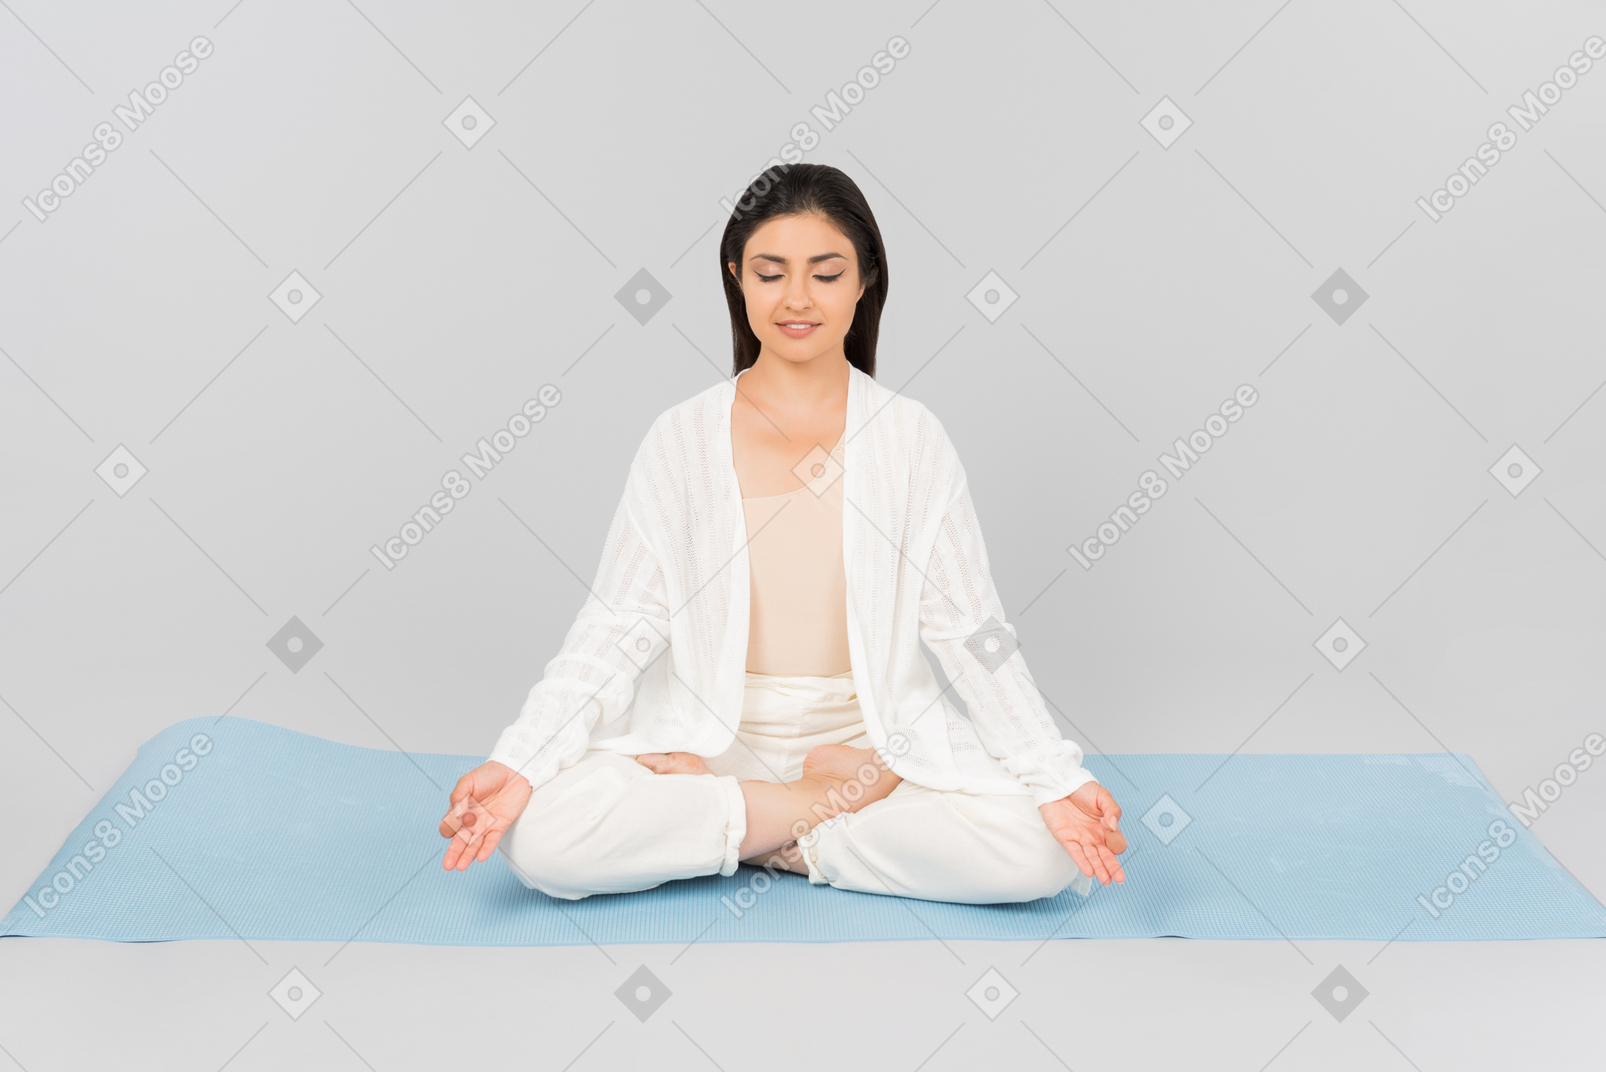 Indian woman sitting with legs crossed on yoga mat